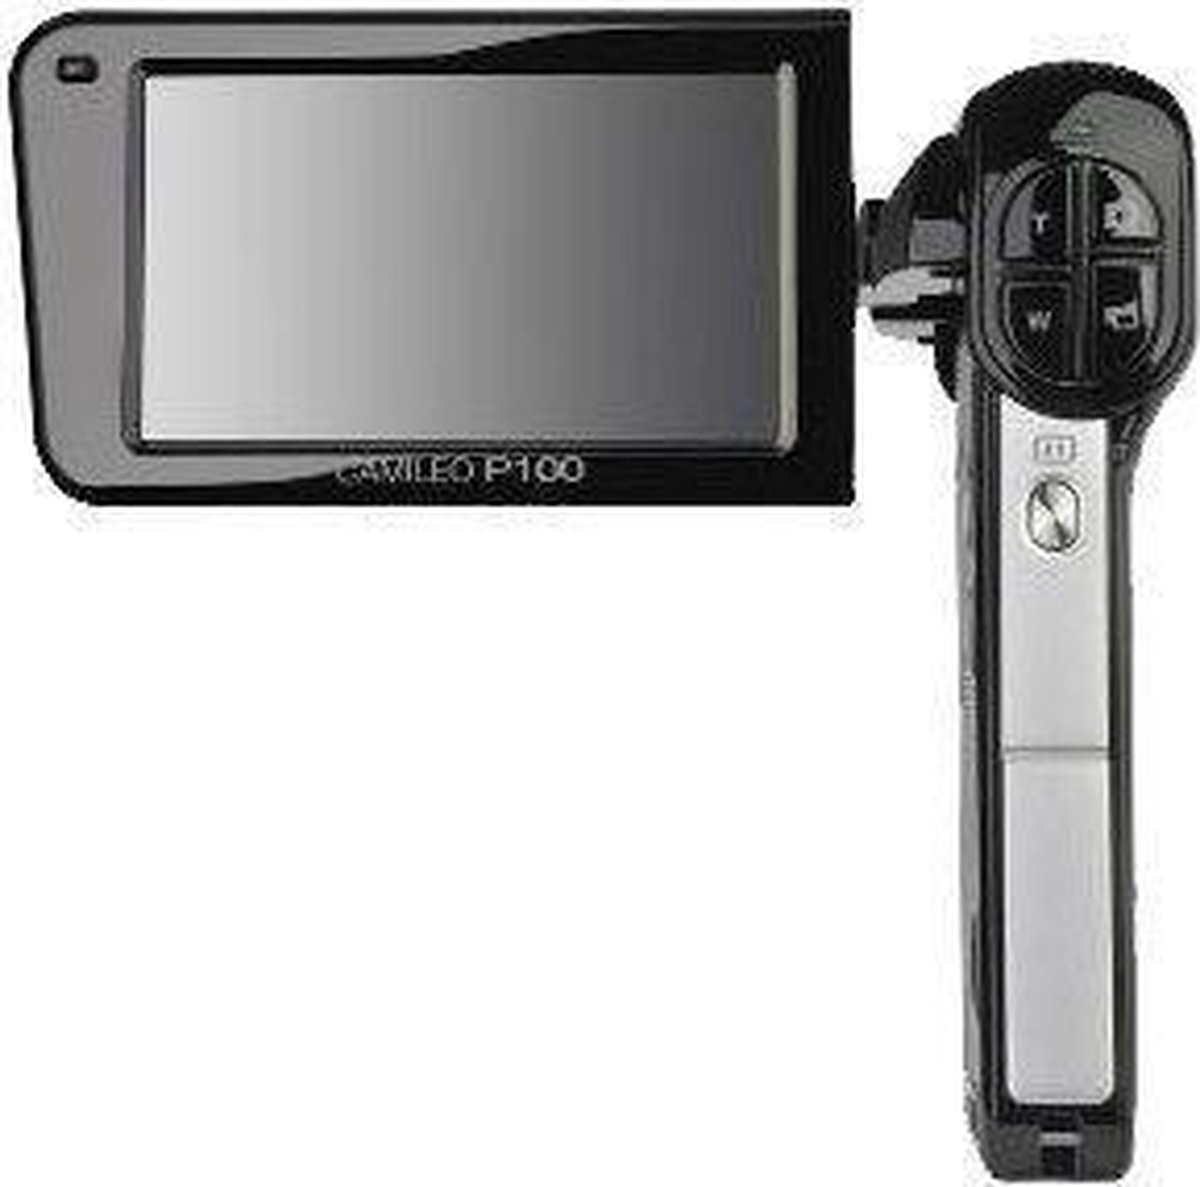 toshiba camileo p100 full hd camcorder review